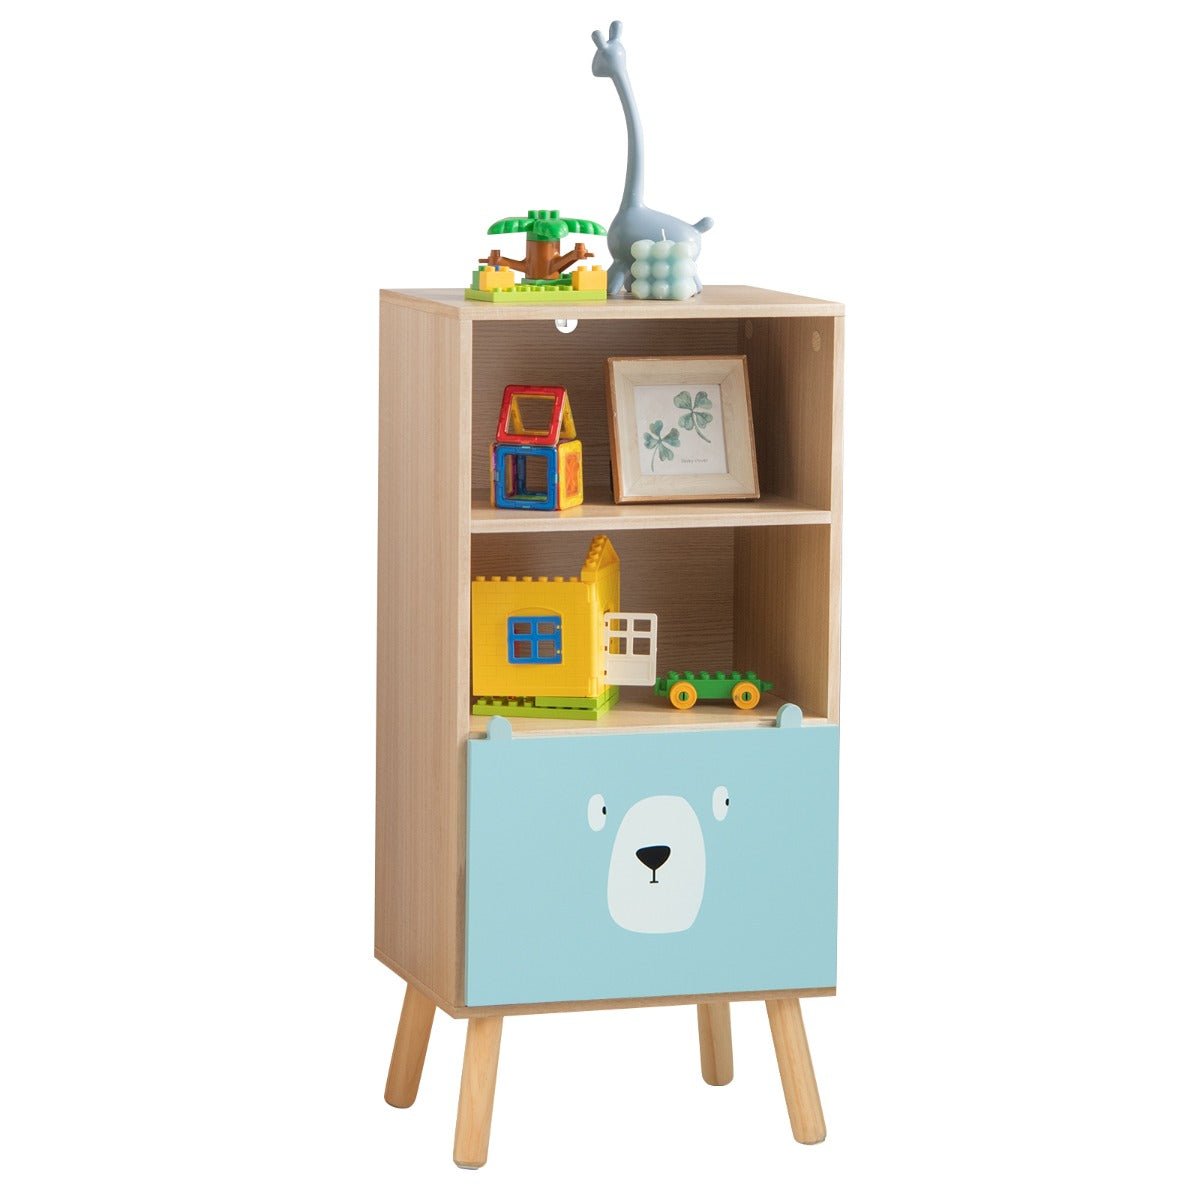 Kid's Room Wooden Bookshelf - 3-Tier Organizer for Play and Learn